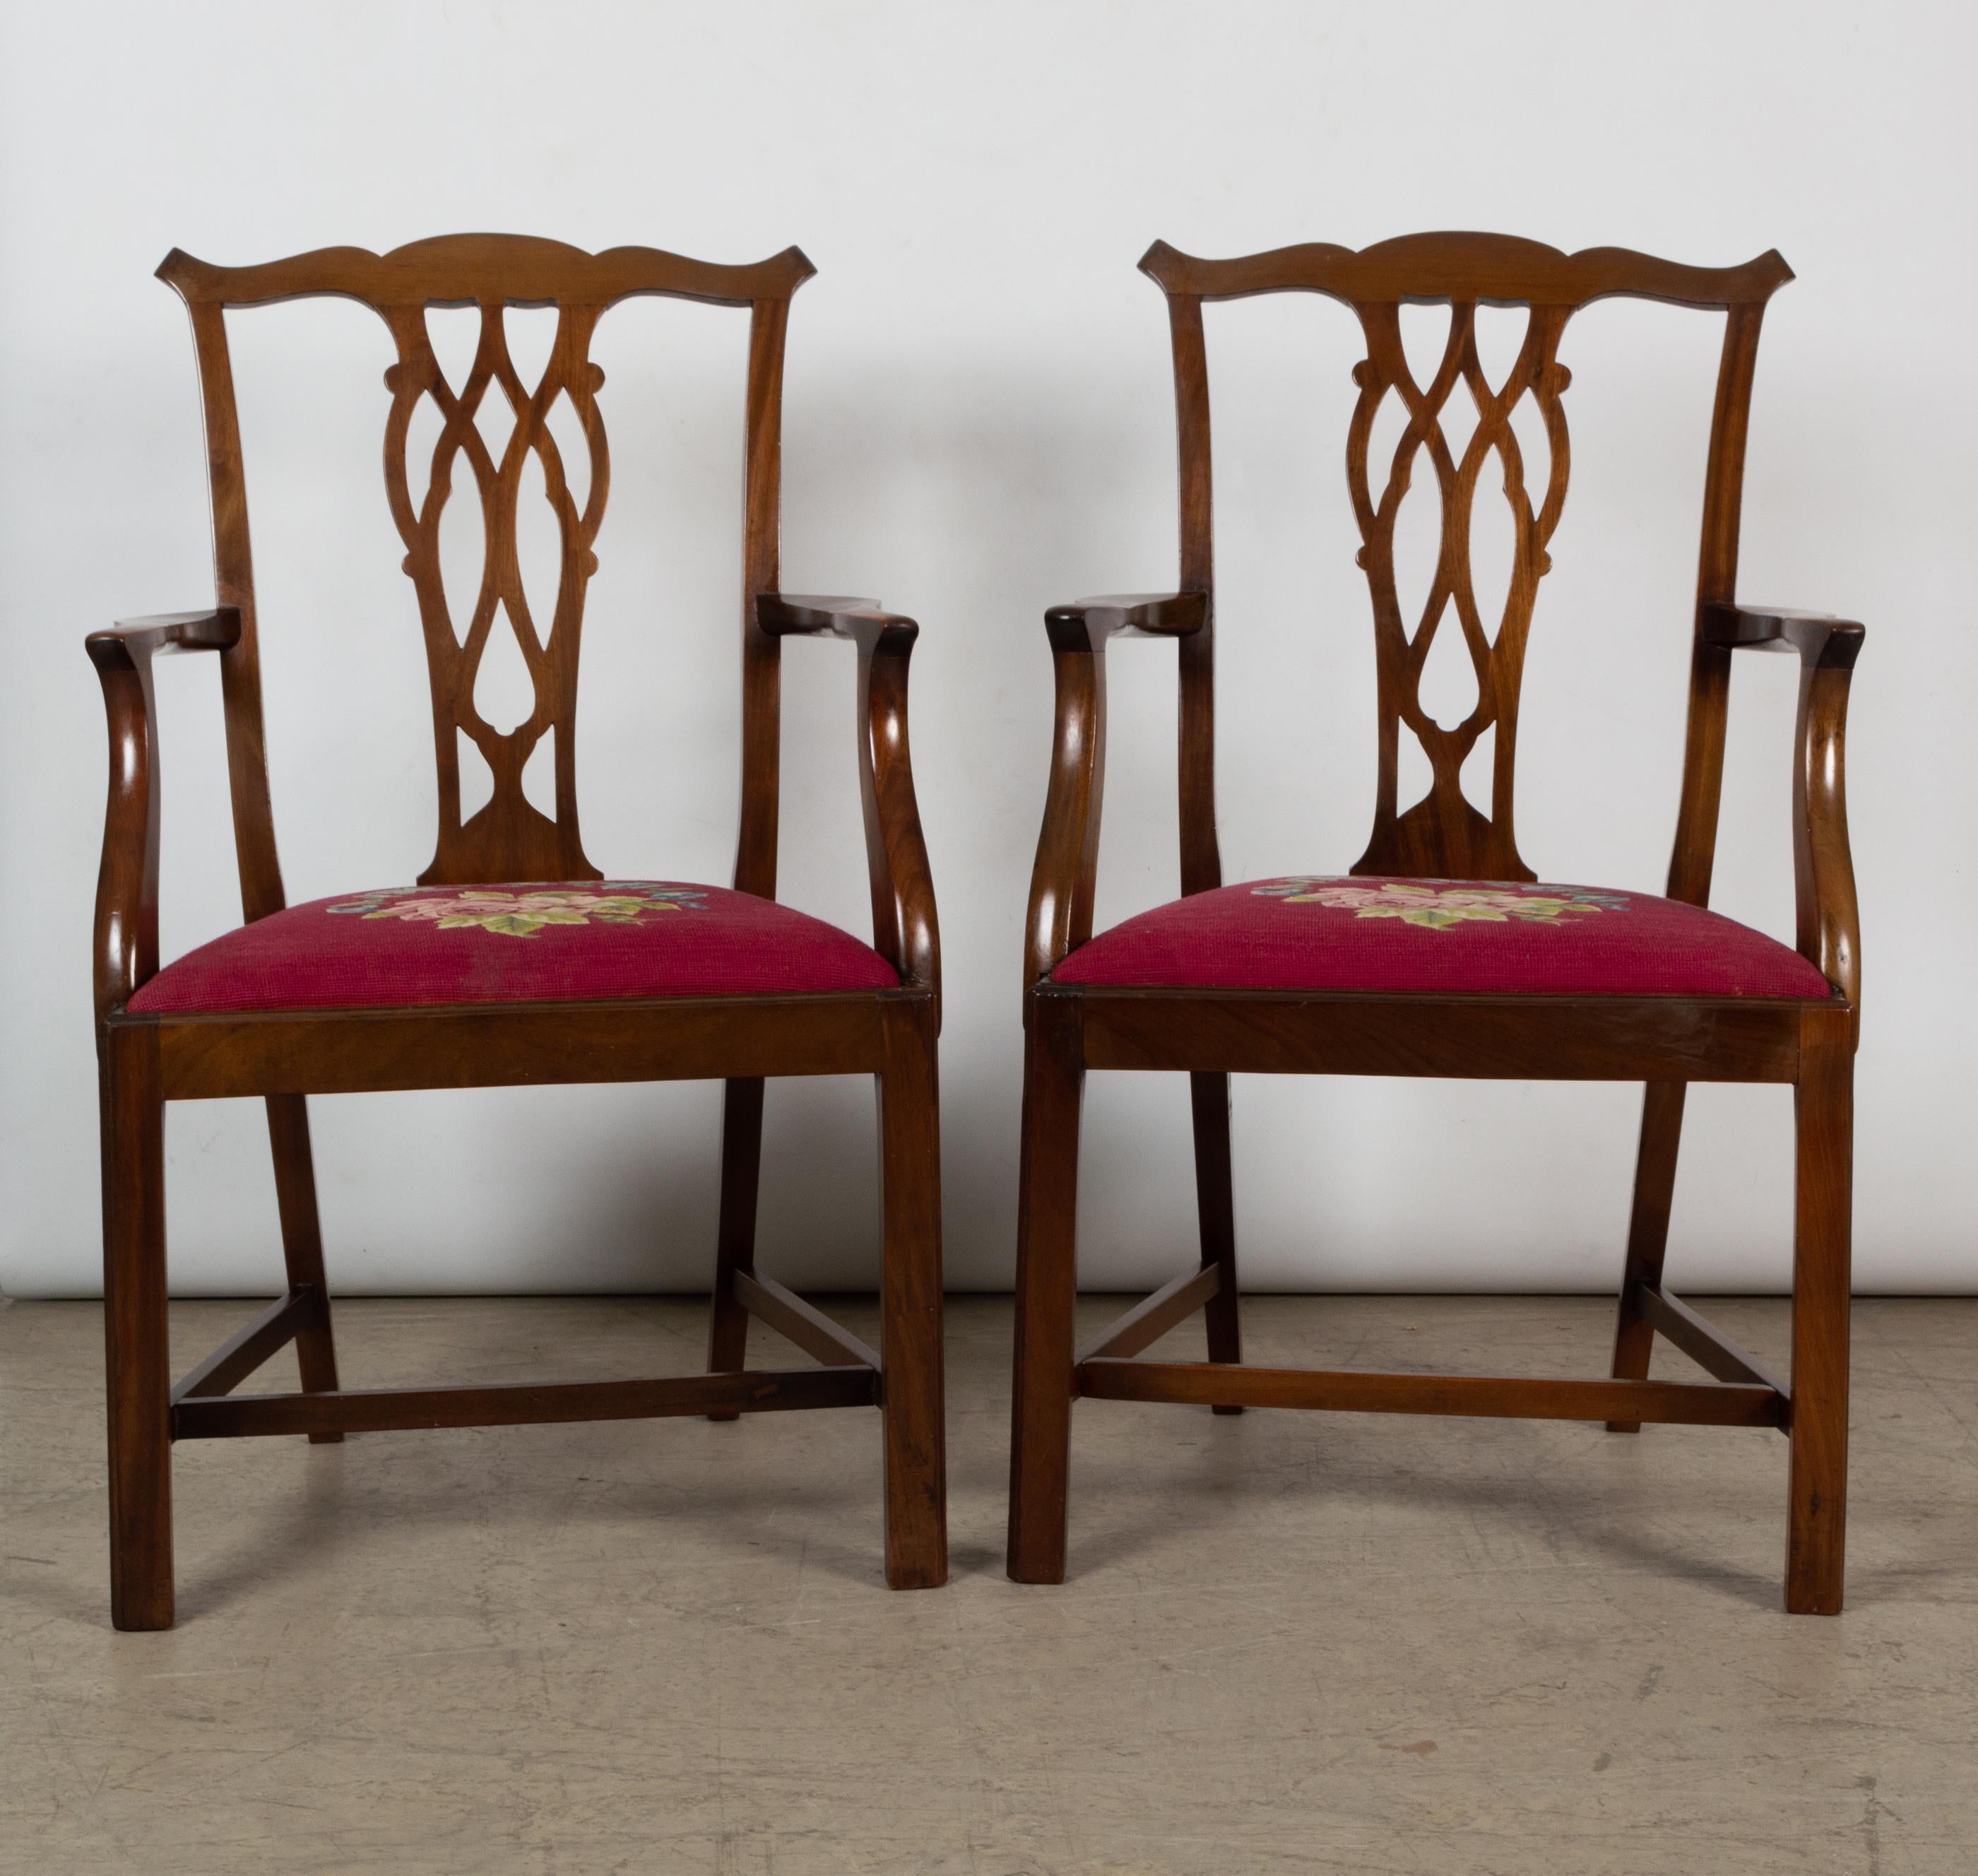 6 antique English Victorian Chippendale Revival Mahogany dining chairs

A fine set of six 19th century mahogany chairs in the Chippendale manner.
Comprised of four + two carvers.

Striking top rail with the distinctive 'Chippendale Ears' and